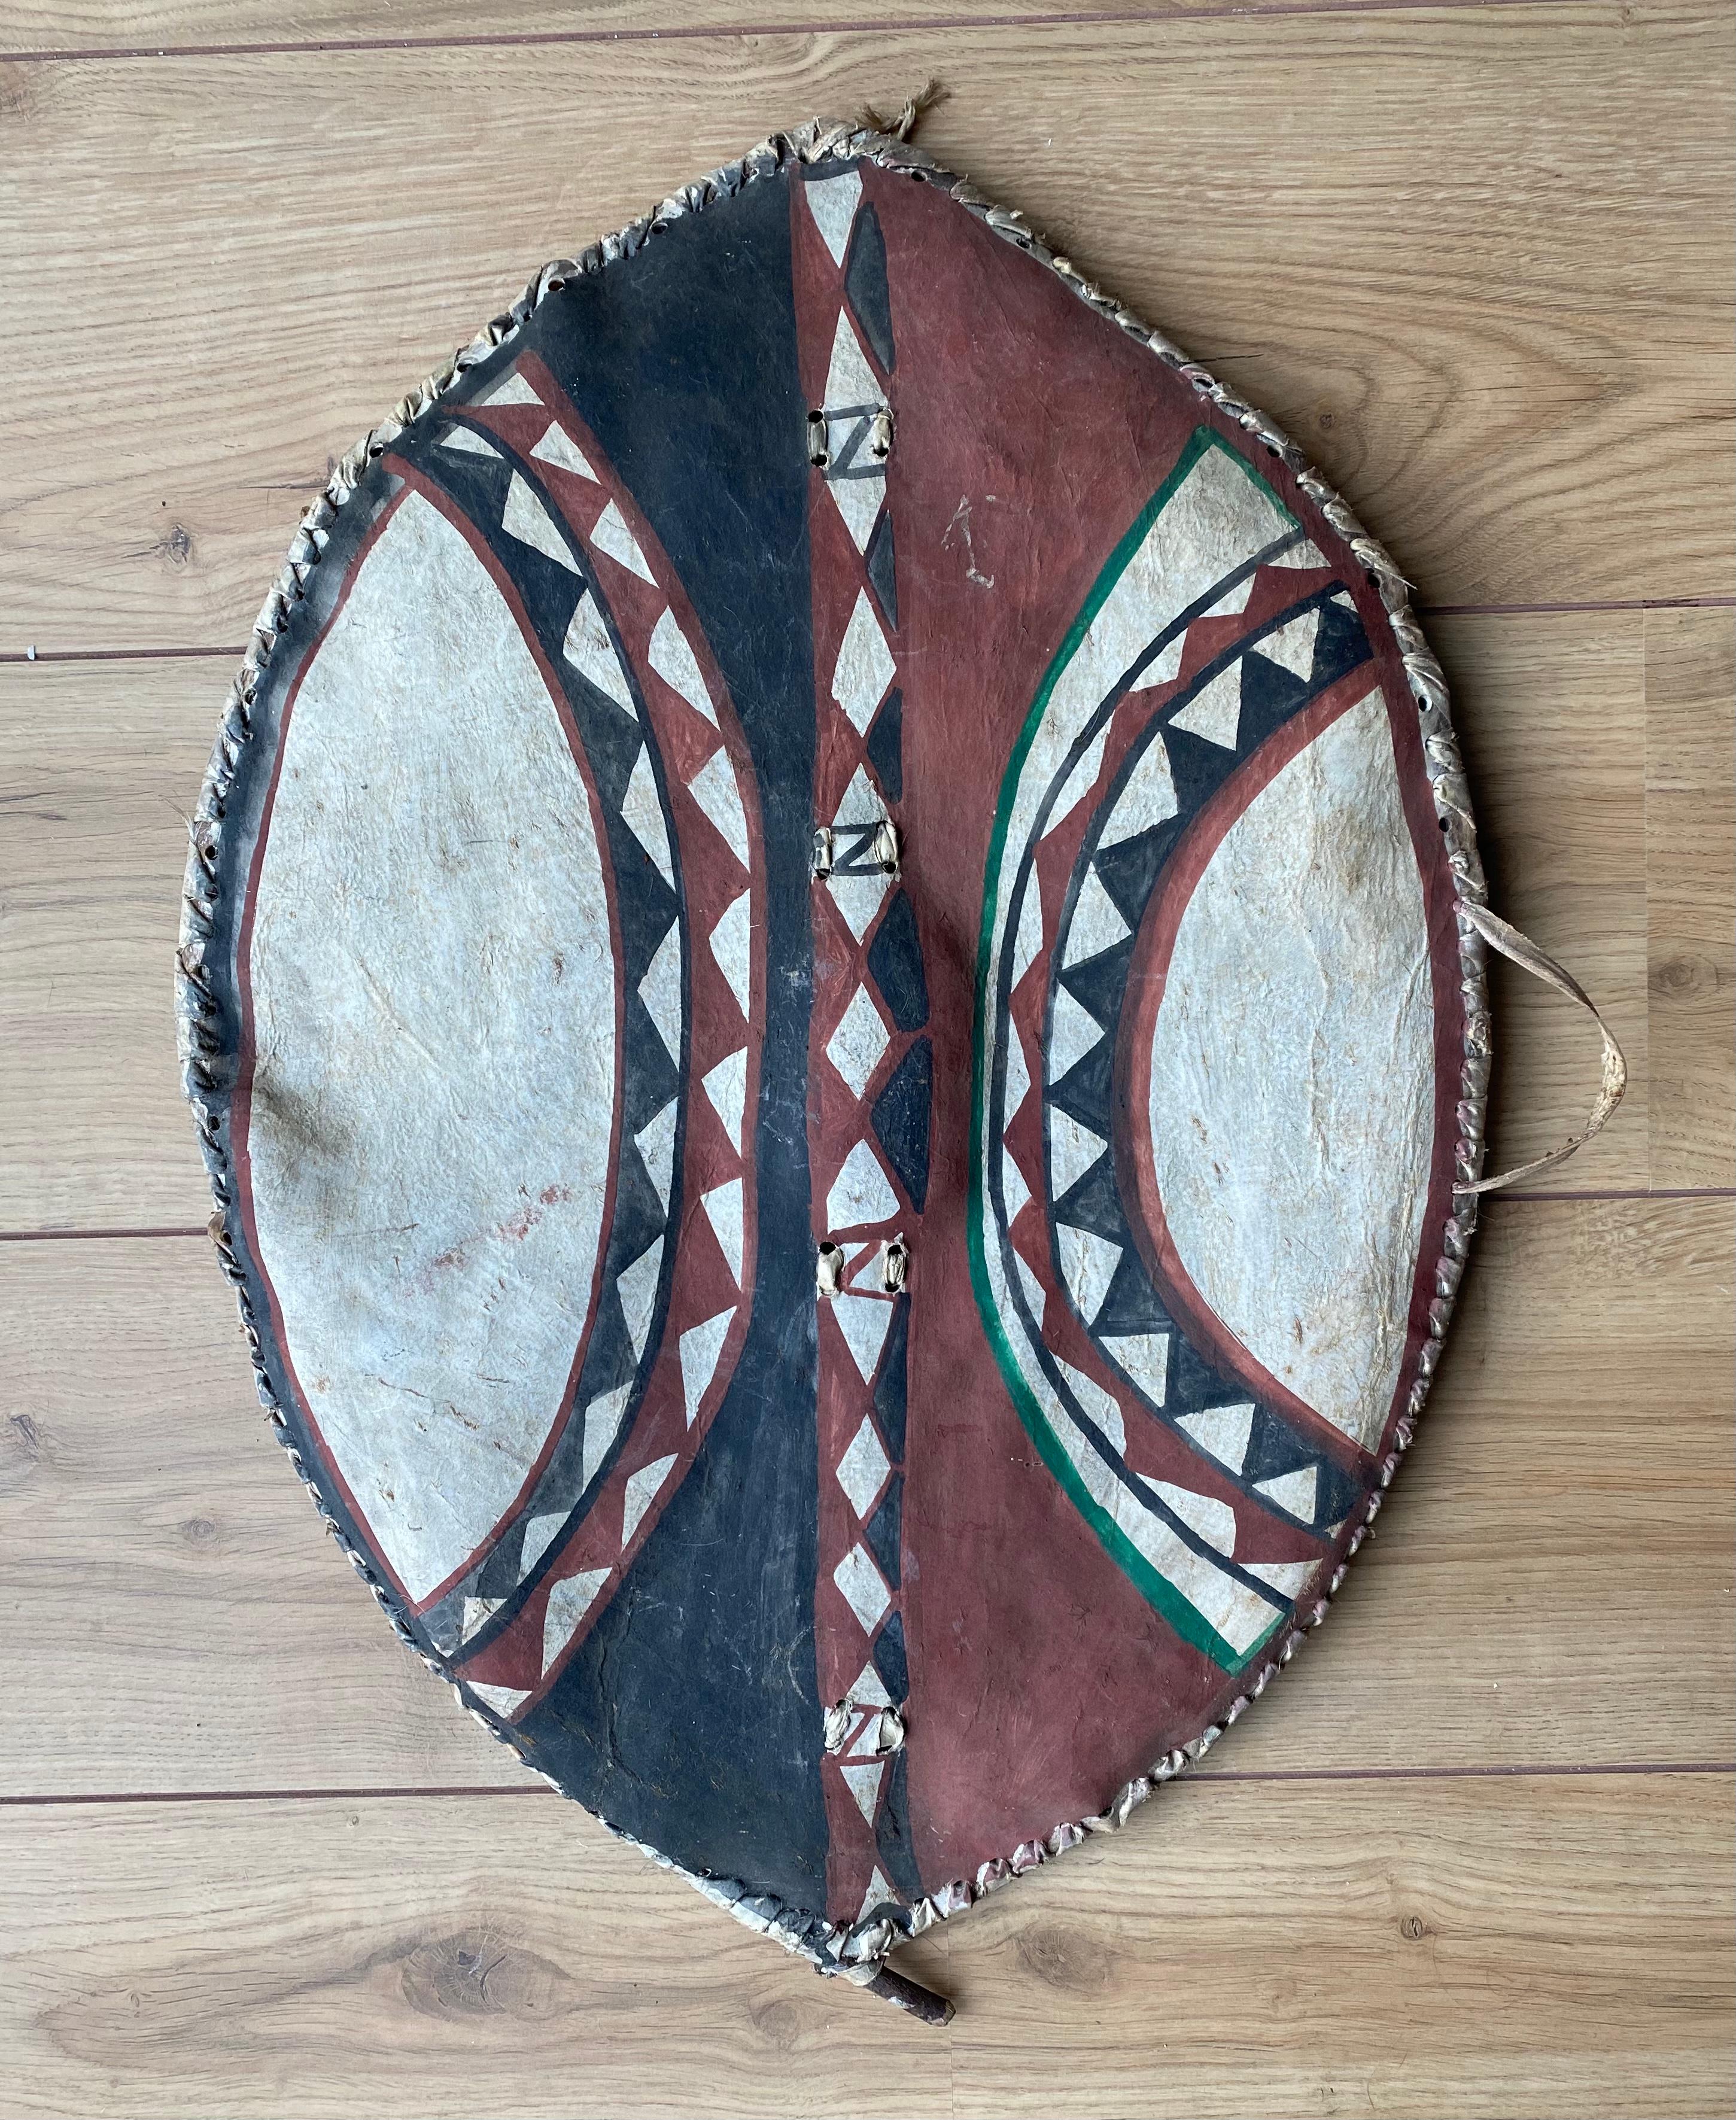 Masai Shield hand painted with pigments on (Cow)hide. This stunning elliptical graphic shield was probably owned by a warrior herder as younger warriors were only permitted to have black, white or gray pigments to decorate their shields. The red